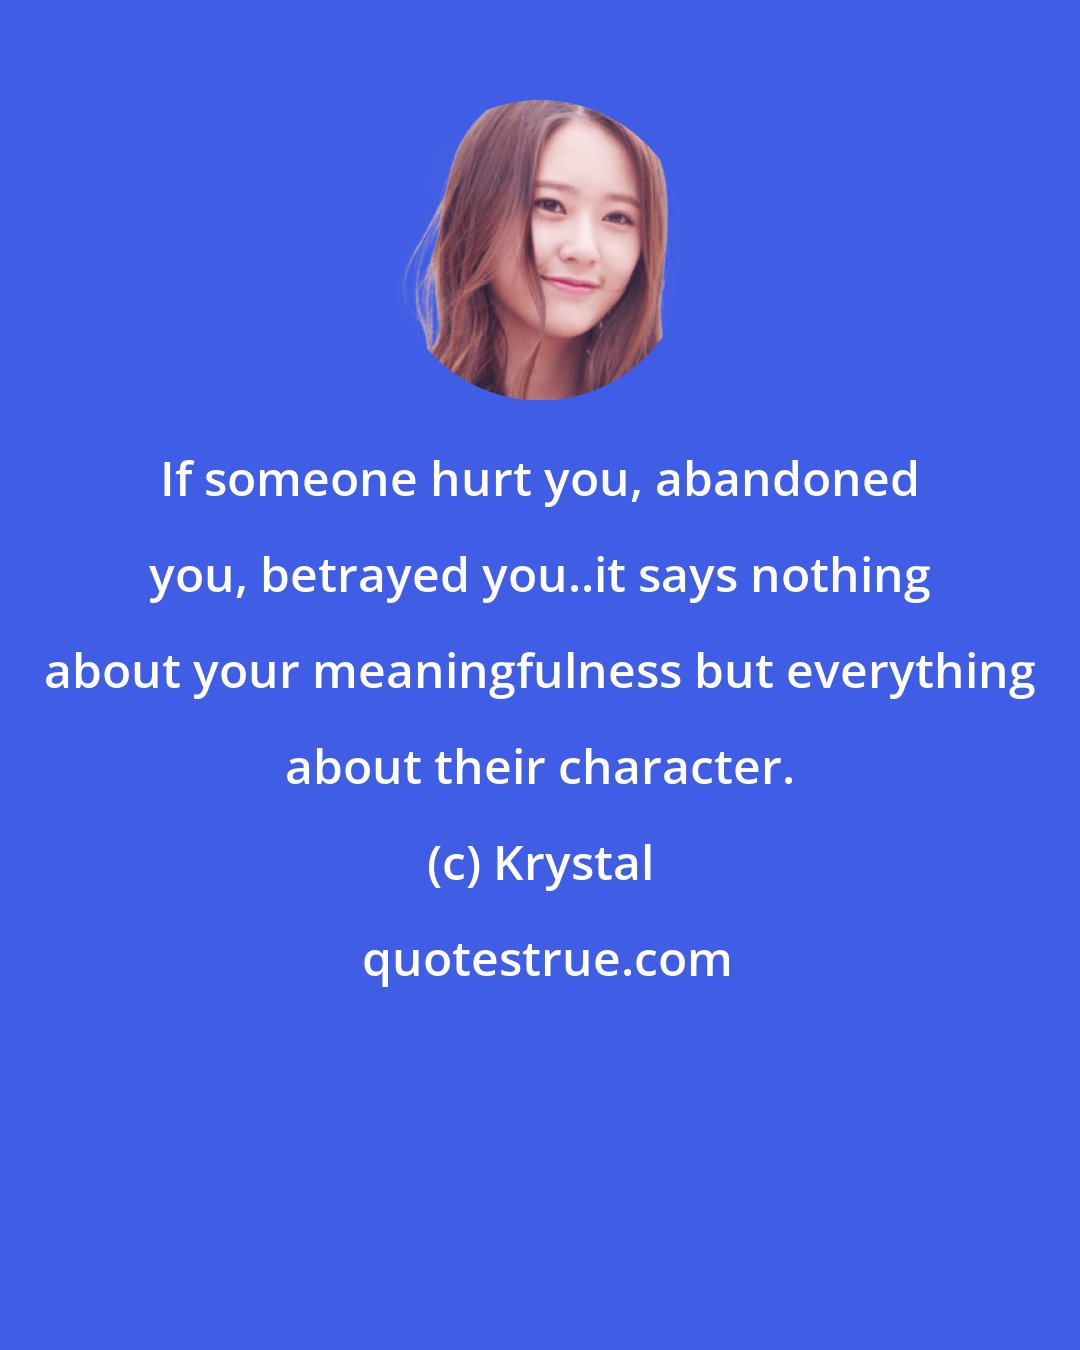 Krystal: If someone hurt you, abandoned you, betrayed you..it says nothing about your meaningfulness but everything about their character.